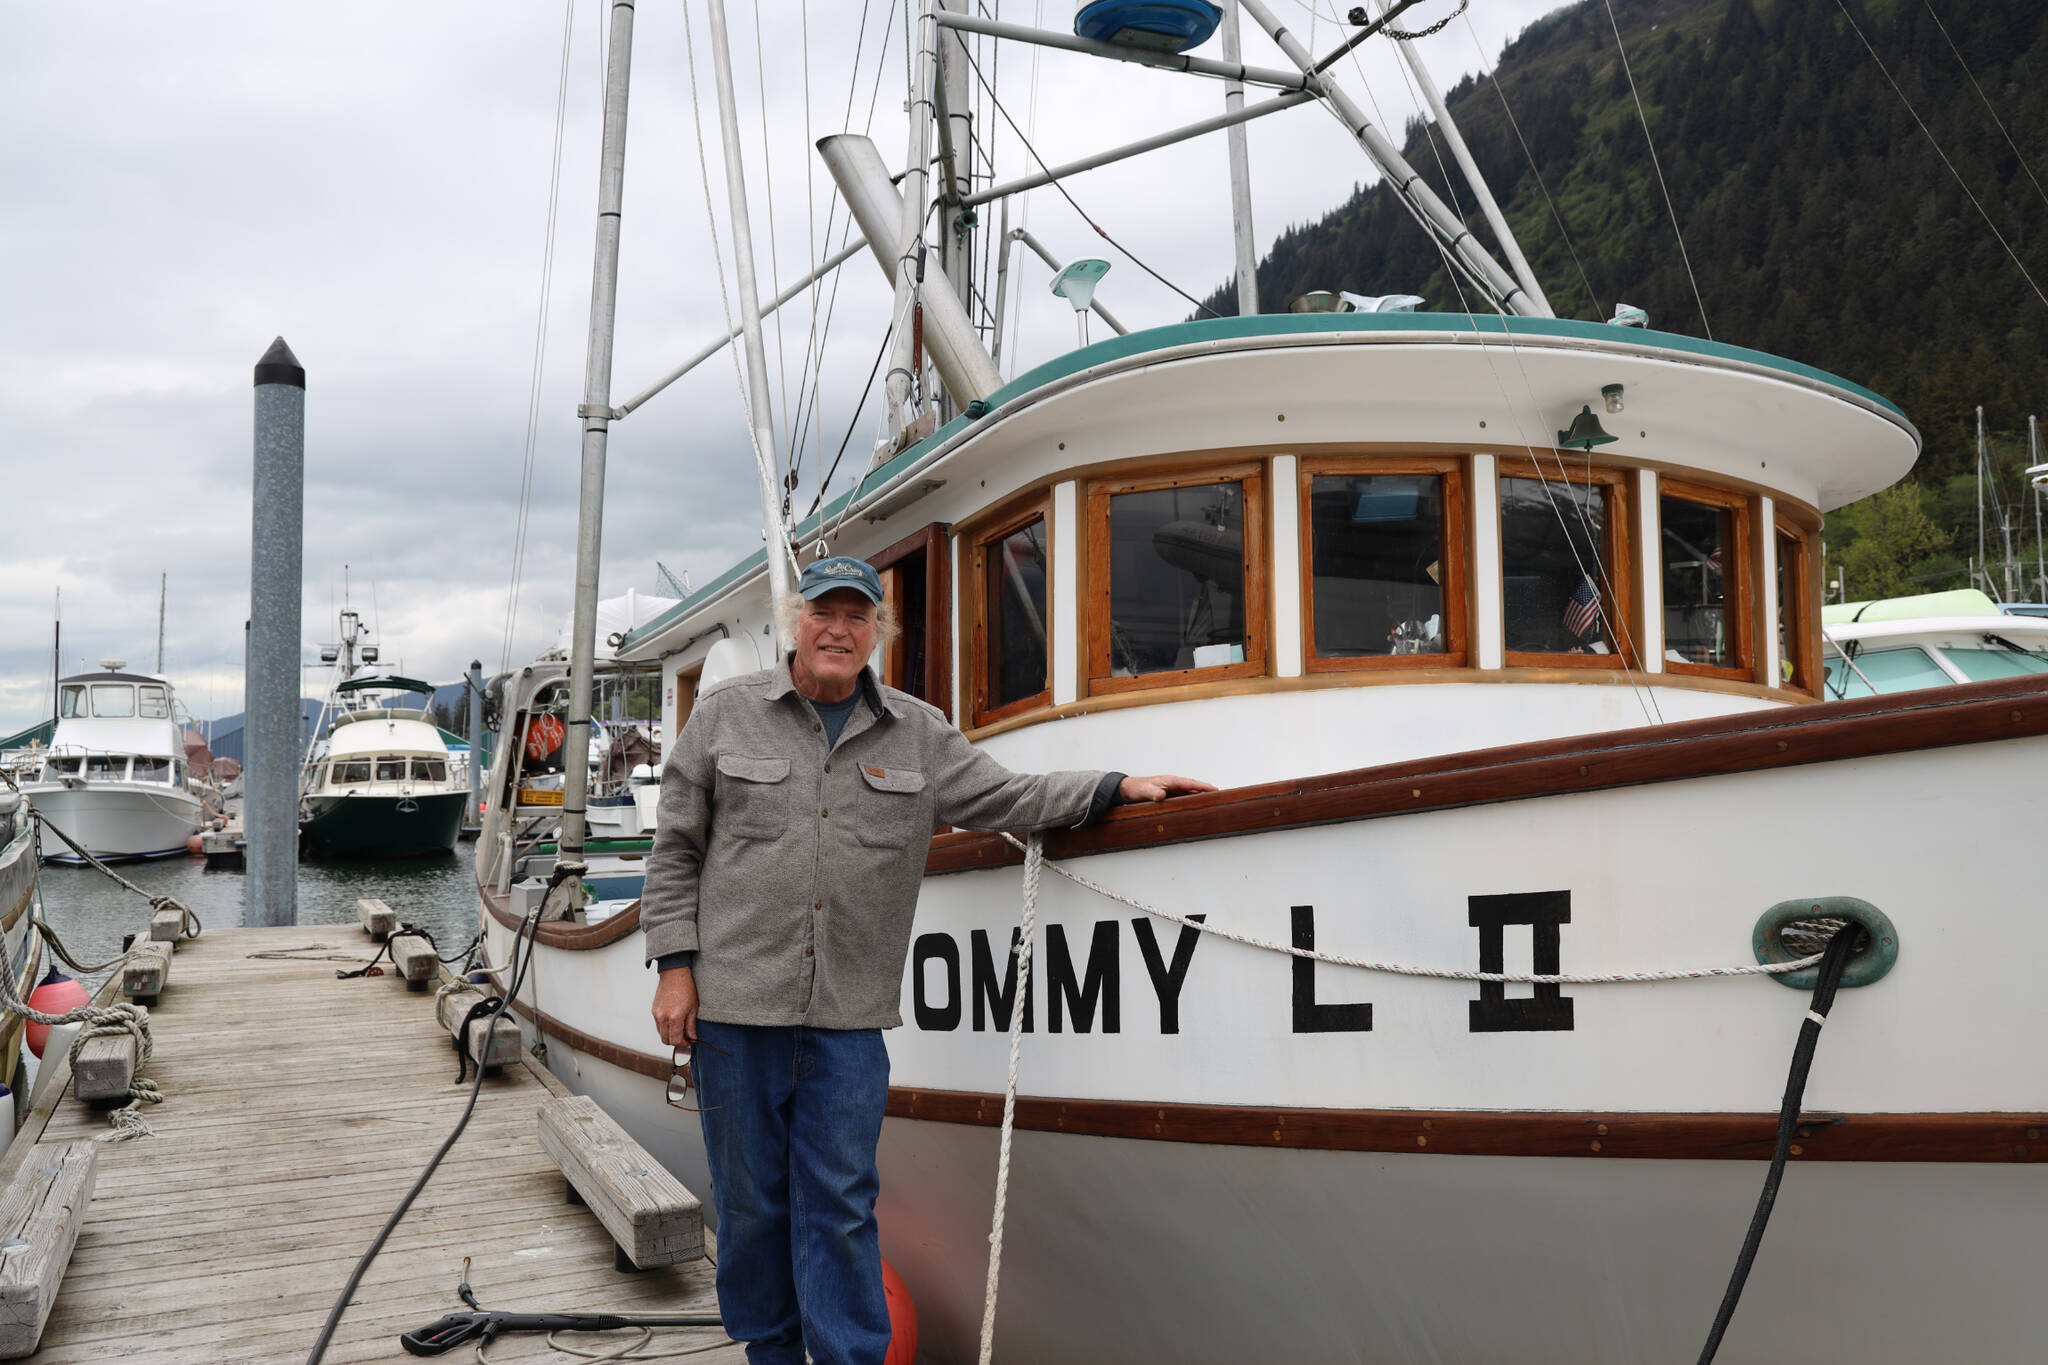 Longtime Juneau resident Joe Emerson, co-owner of the F/V Tommy L II berthed in Aurora Harbor, smiles for a photo next to his boat in late May. Emerson is one of the hundreds of trollers in Southeast Alaska that will be directly impacted by a federal court order that may force the closure of the region’s king salmon troll fishery set to begin July 1. (Clarise Larson / Juneau Empire)